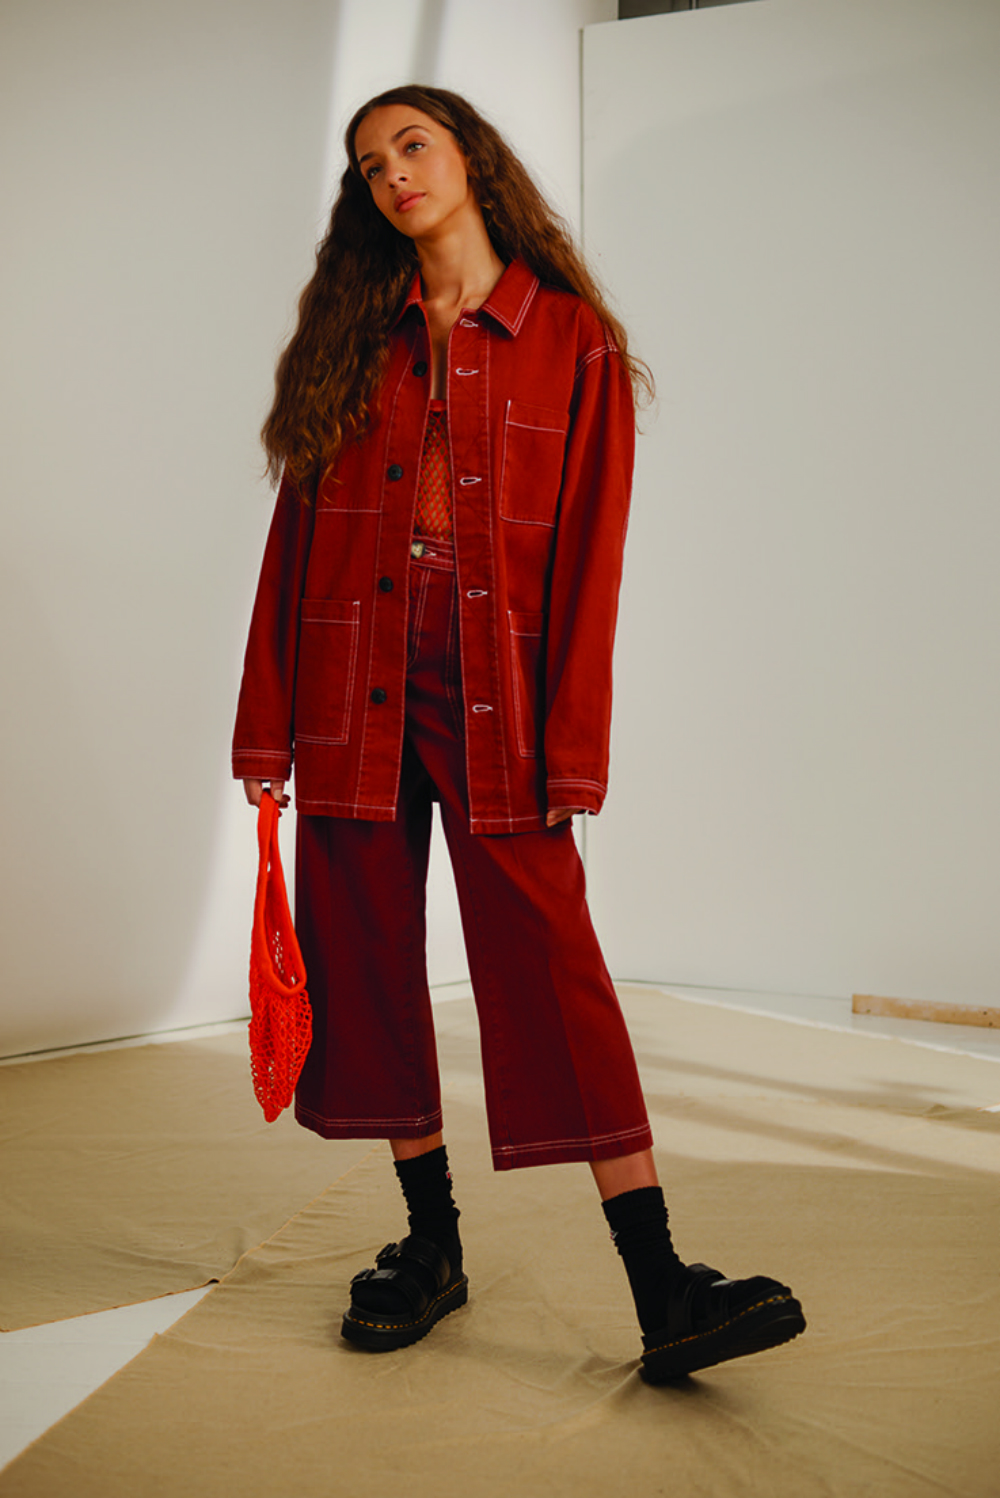 Urban Outfitters Unisex Suit SS18 Collection Interview Lizzie Dawson